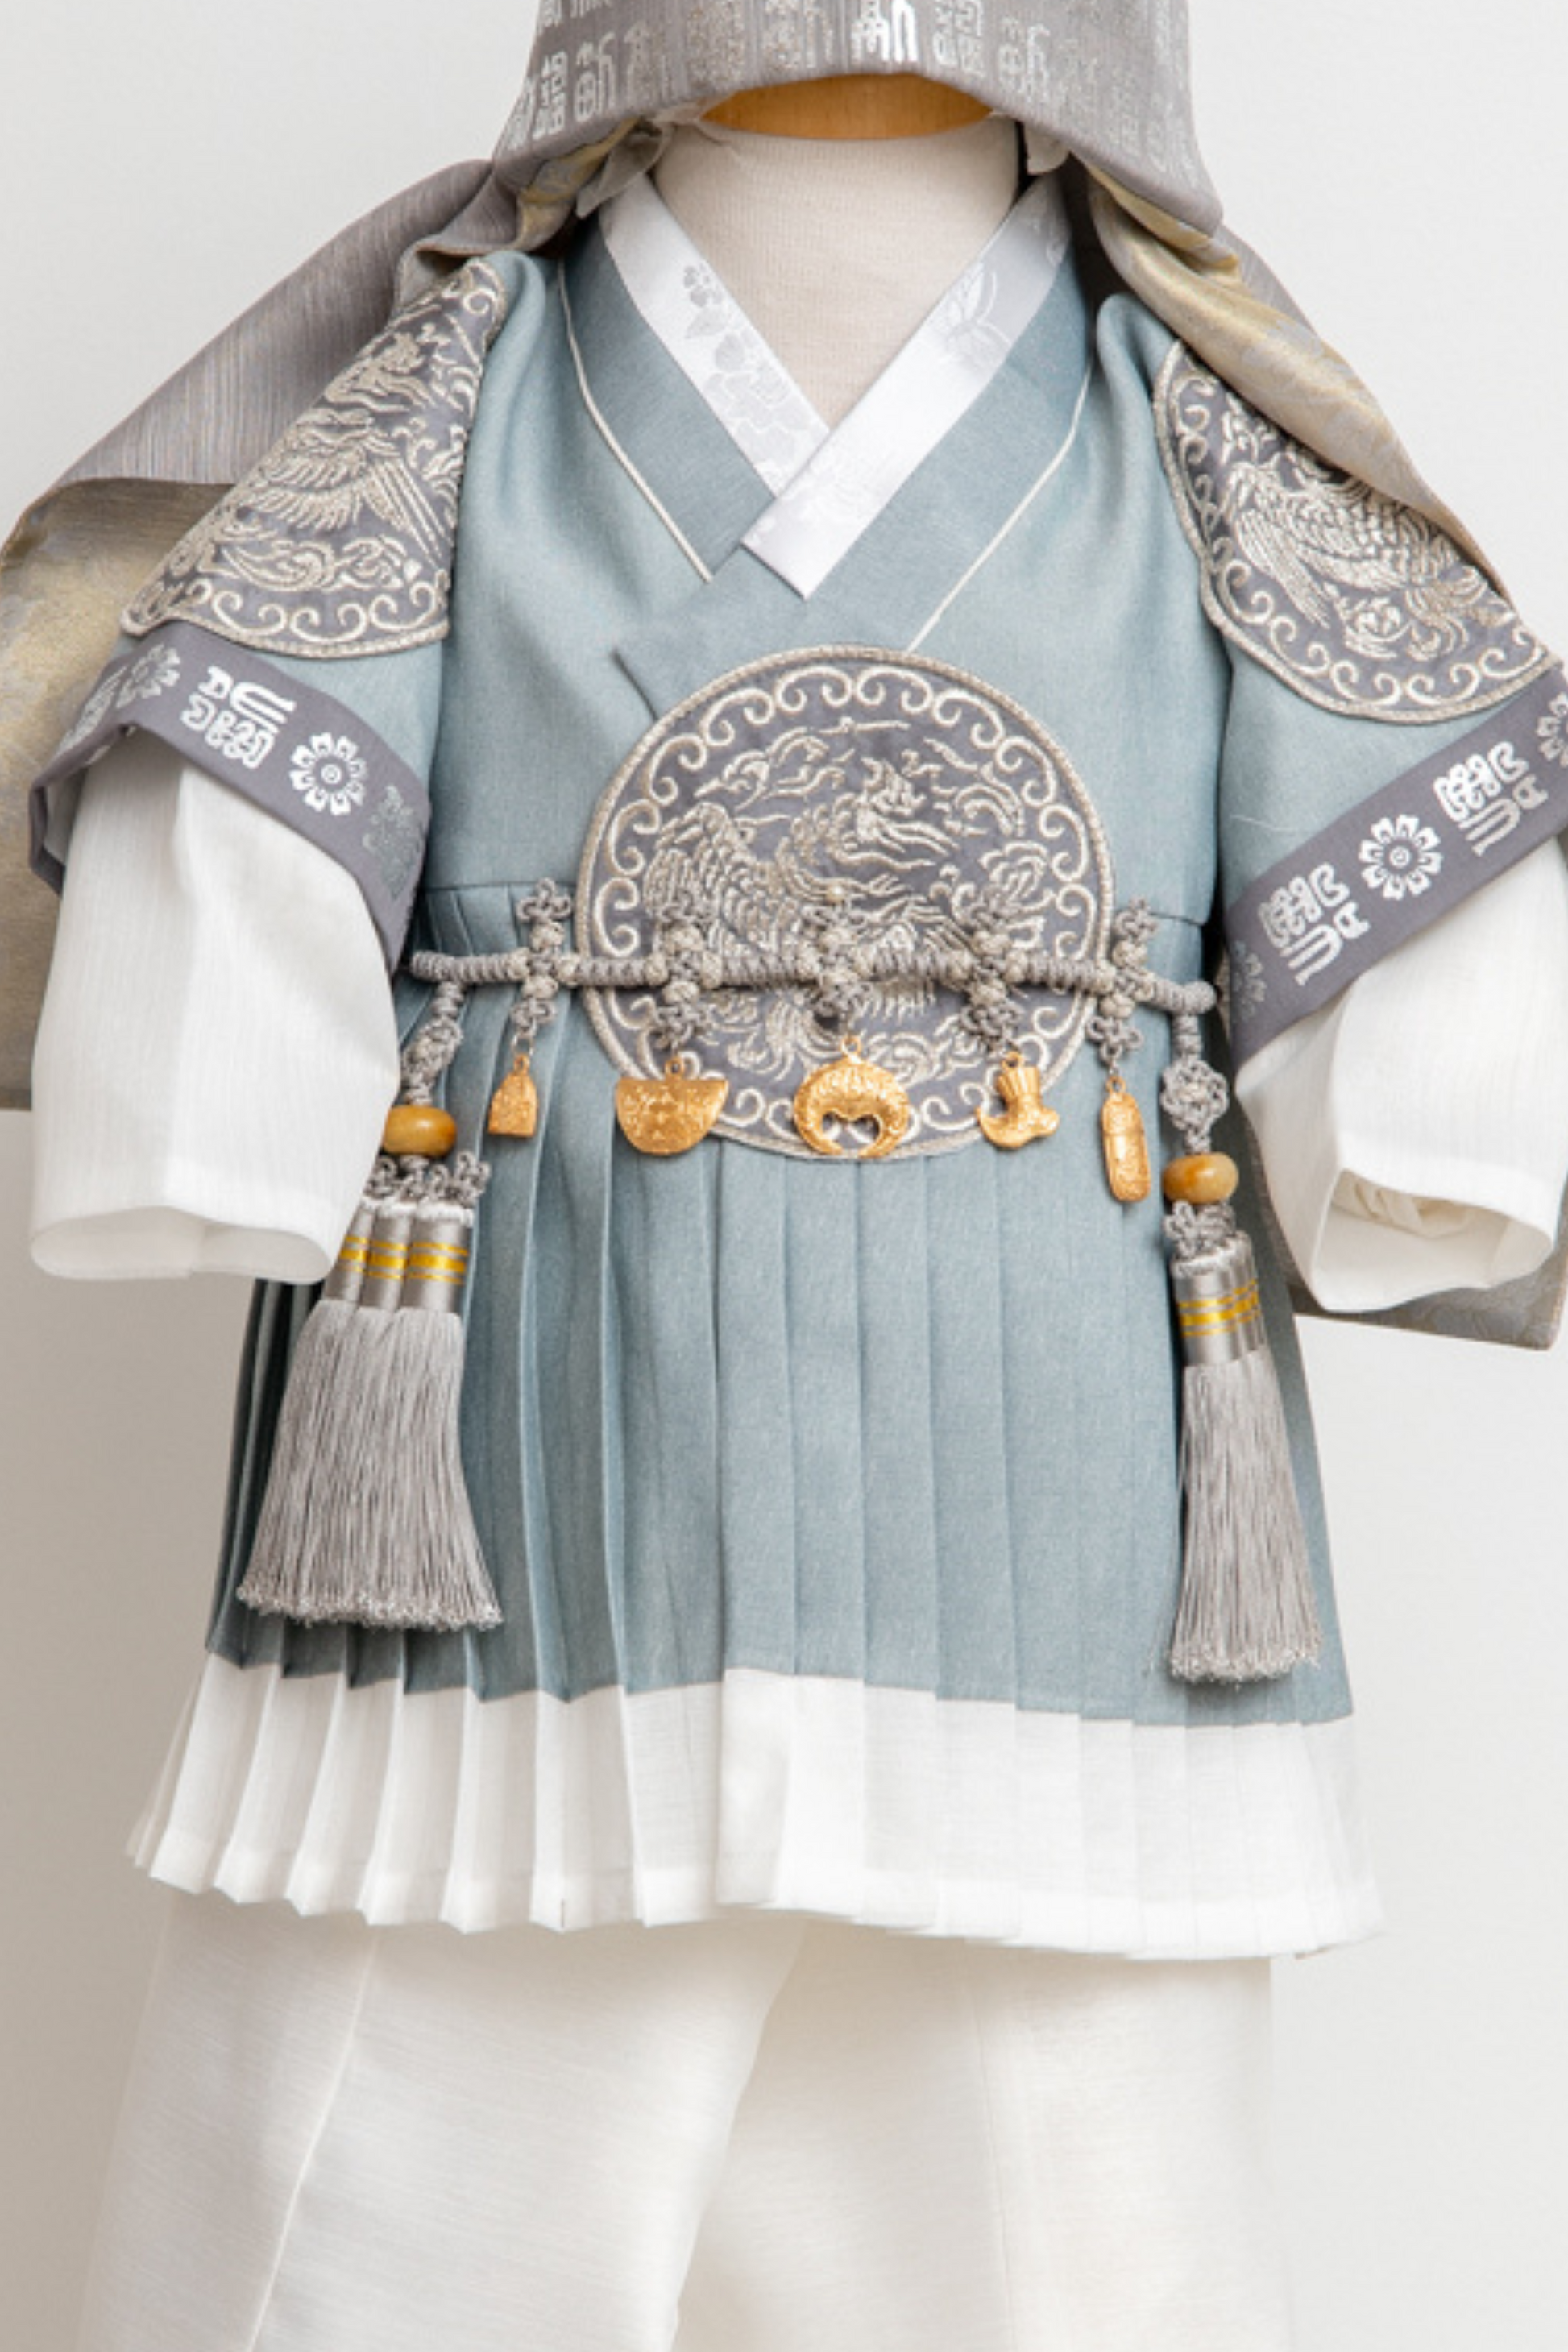 Silk belt for baby boy dohl hanbok with gold embellishments